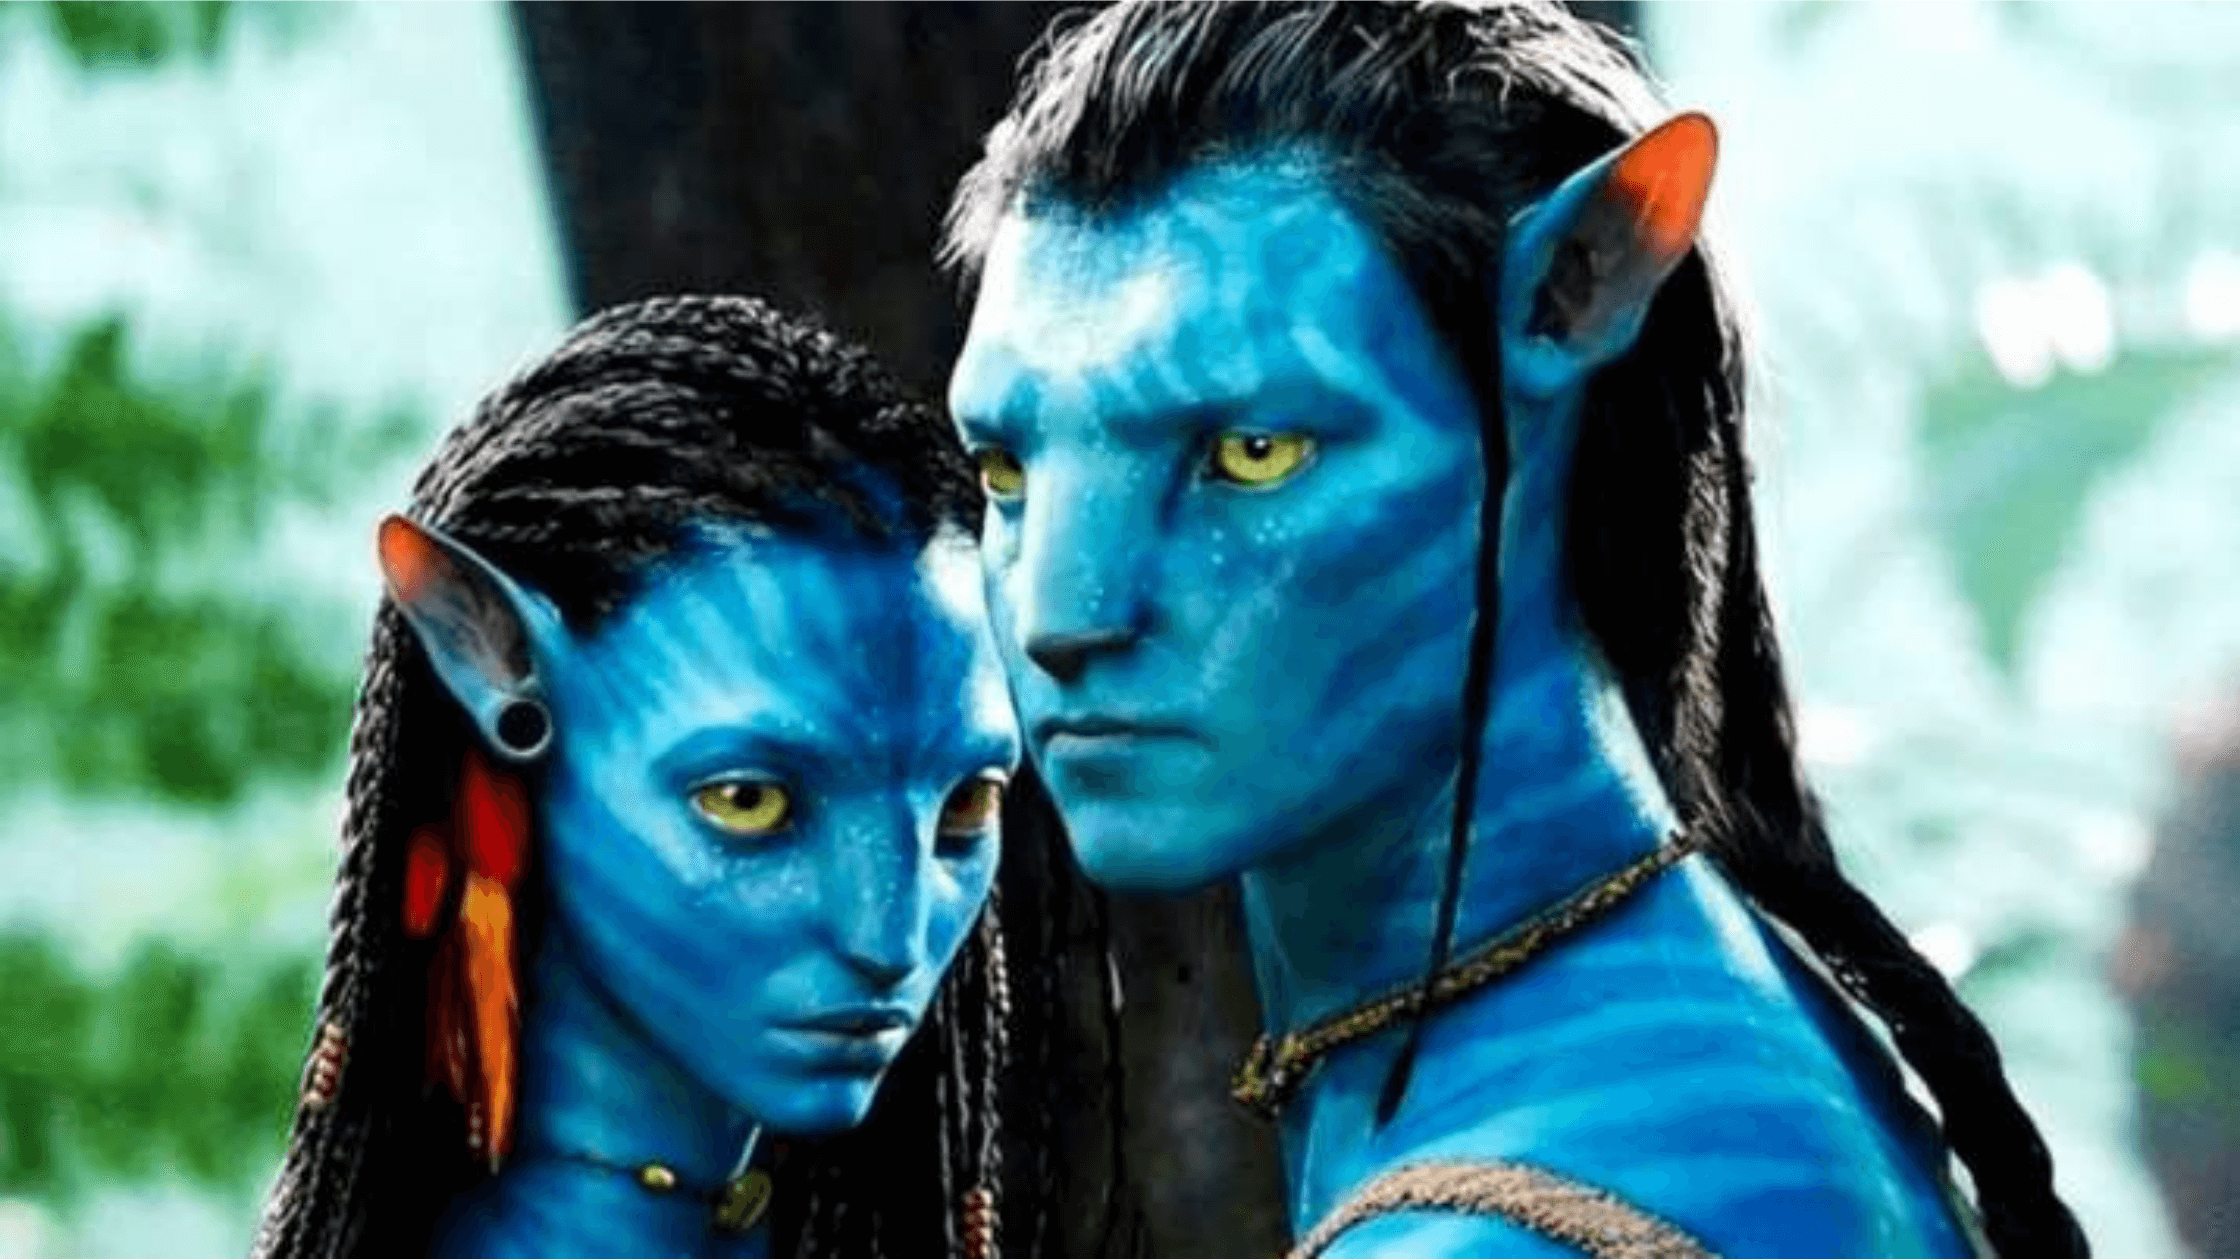  Avatar 2 First Proper Look Out!!! When Will It Release